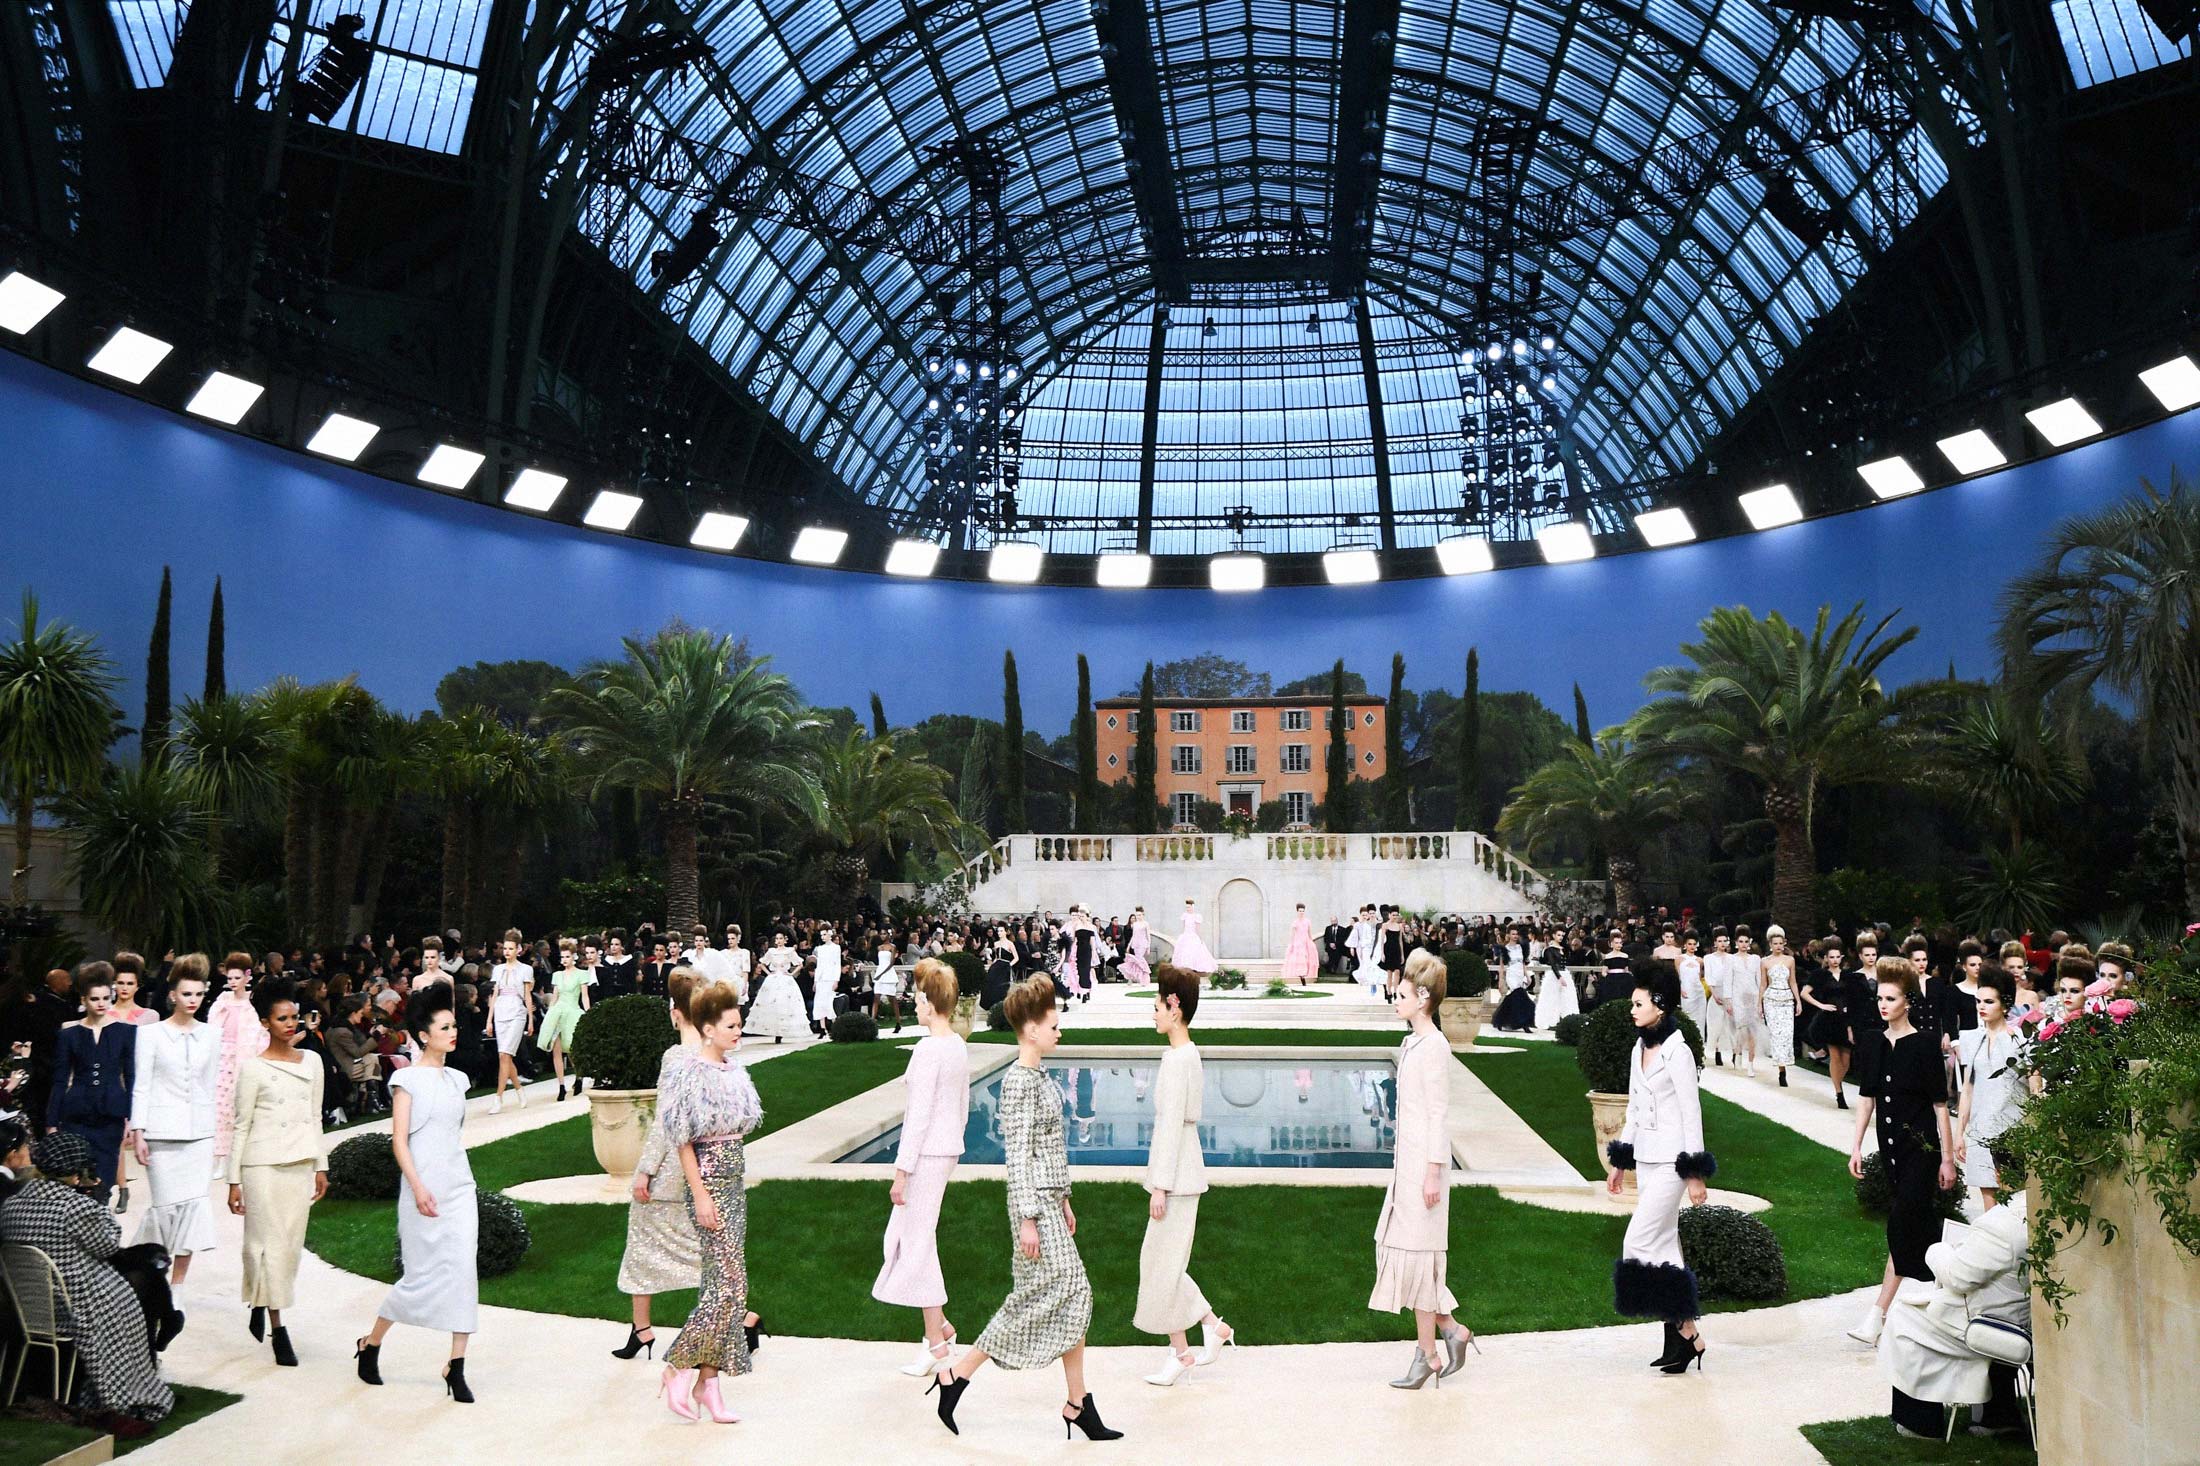 Karl Lagerfeld's 'Bad Cold' Raises Questions About Chanel - Bloomberg